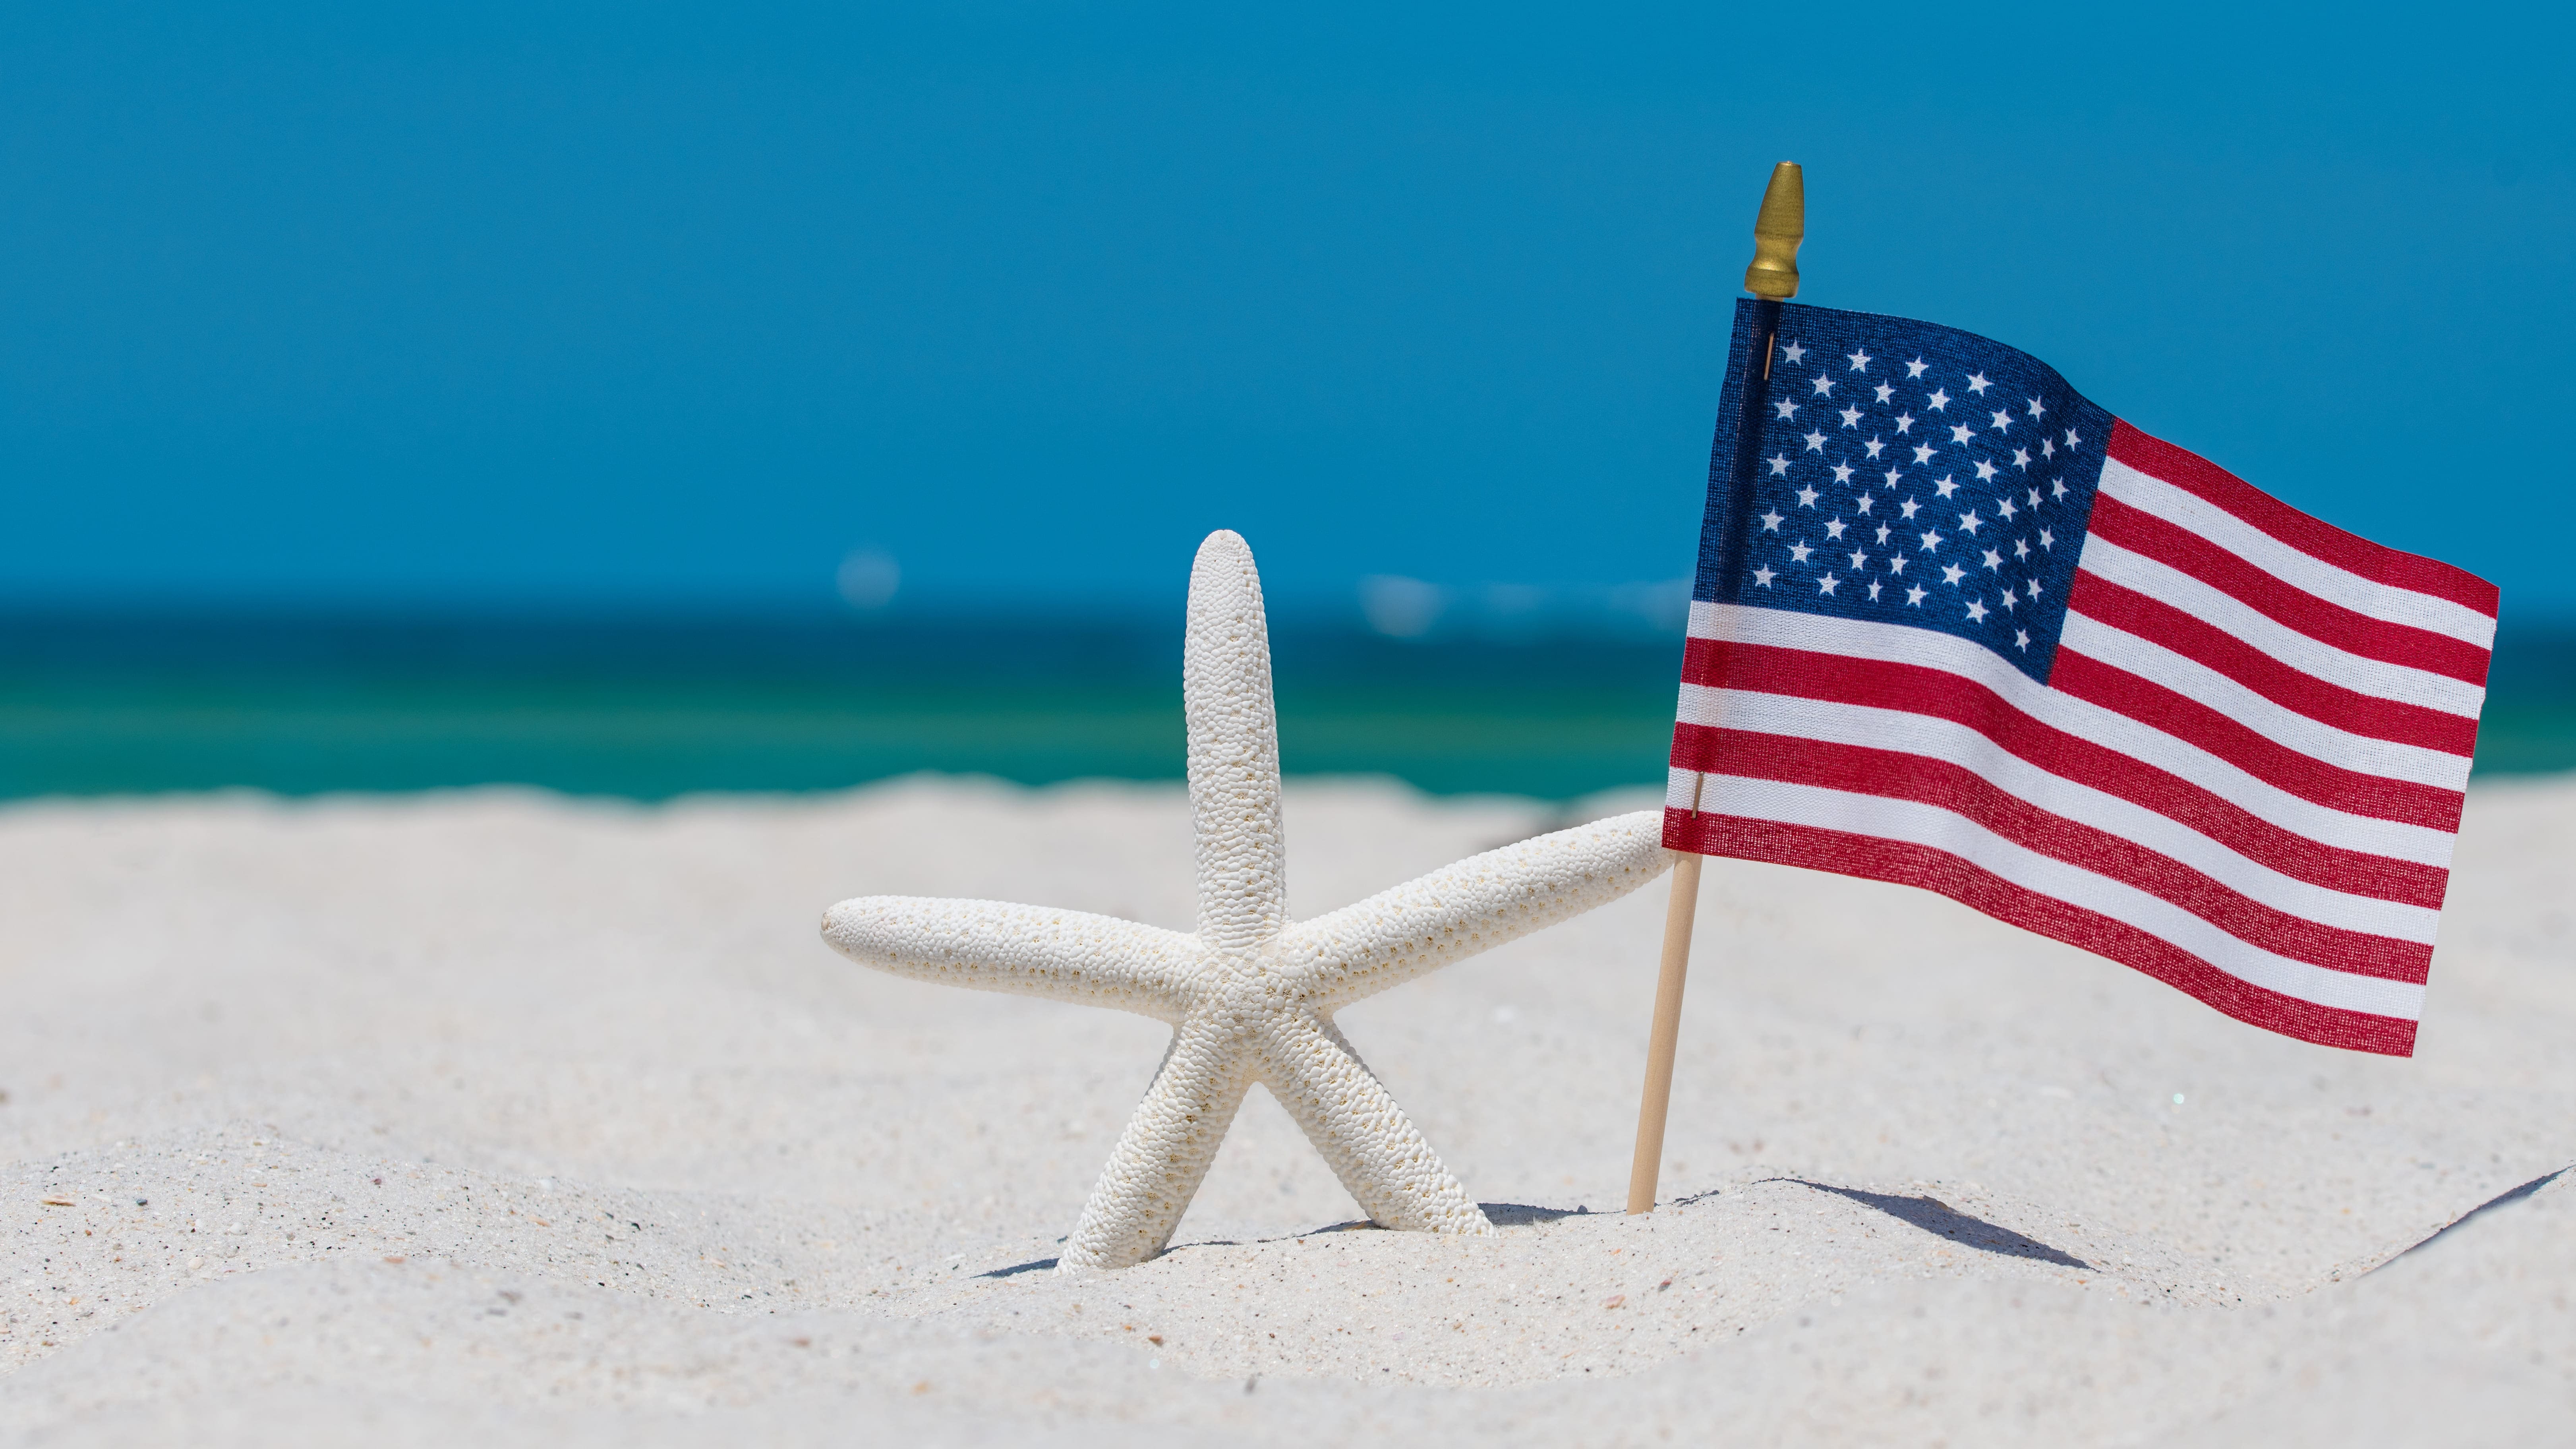 American flag next to a starfish on a beach in Florida